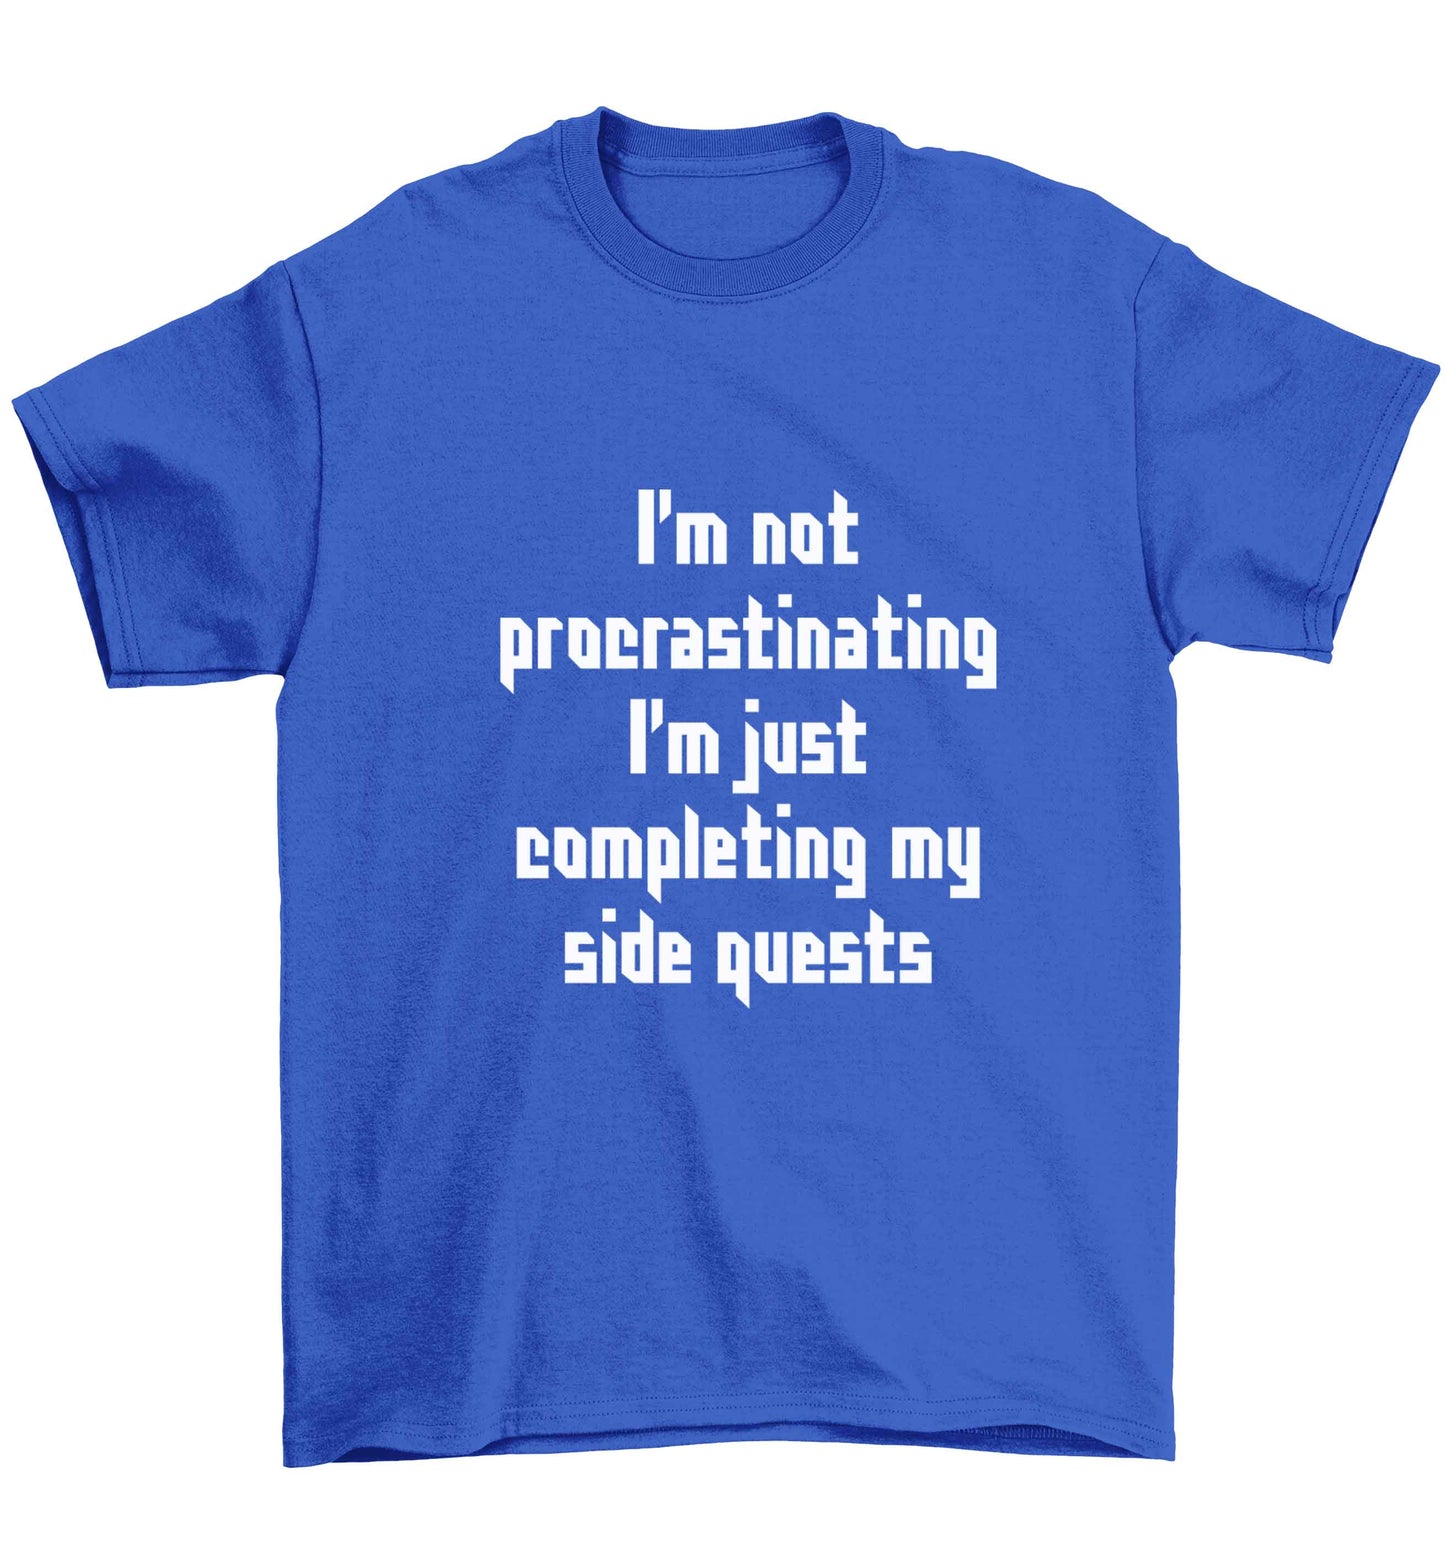 I'm not procrastinating I'm just completing my side quests Children's blue Tshirt 12-13 Years